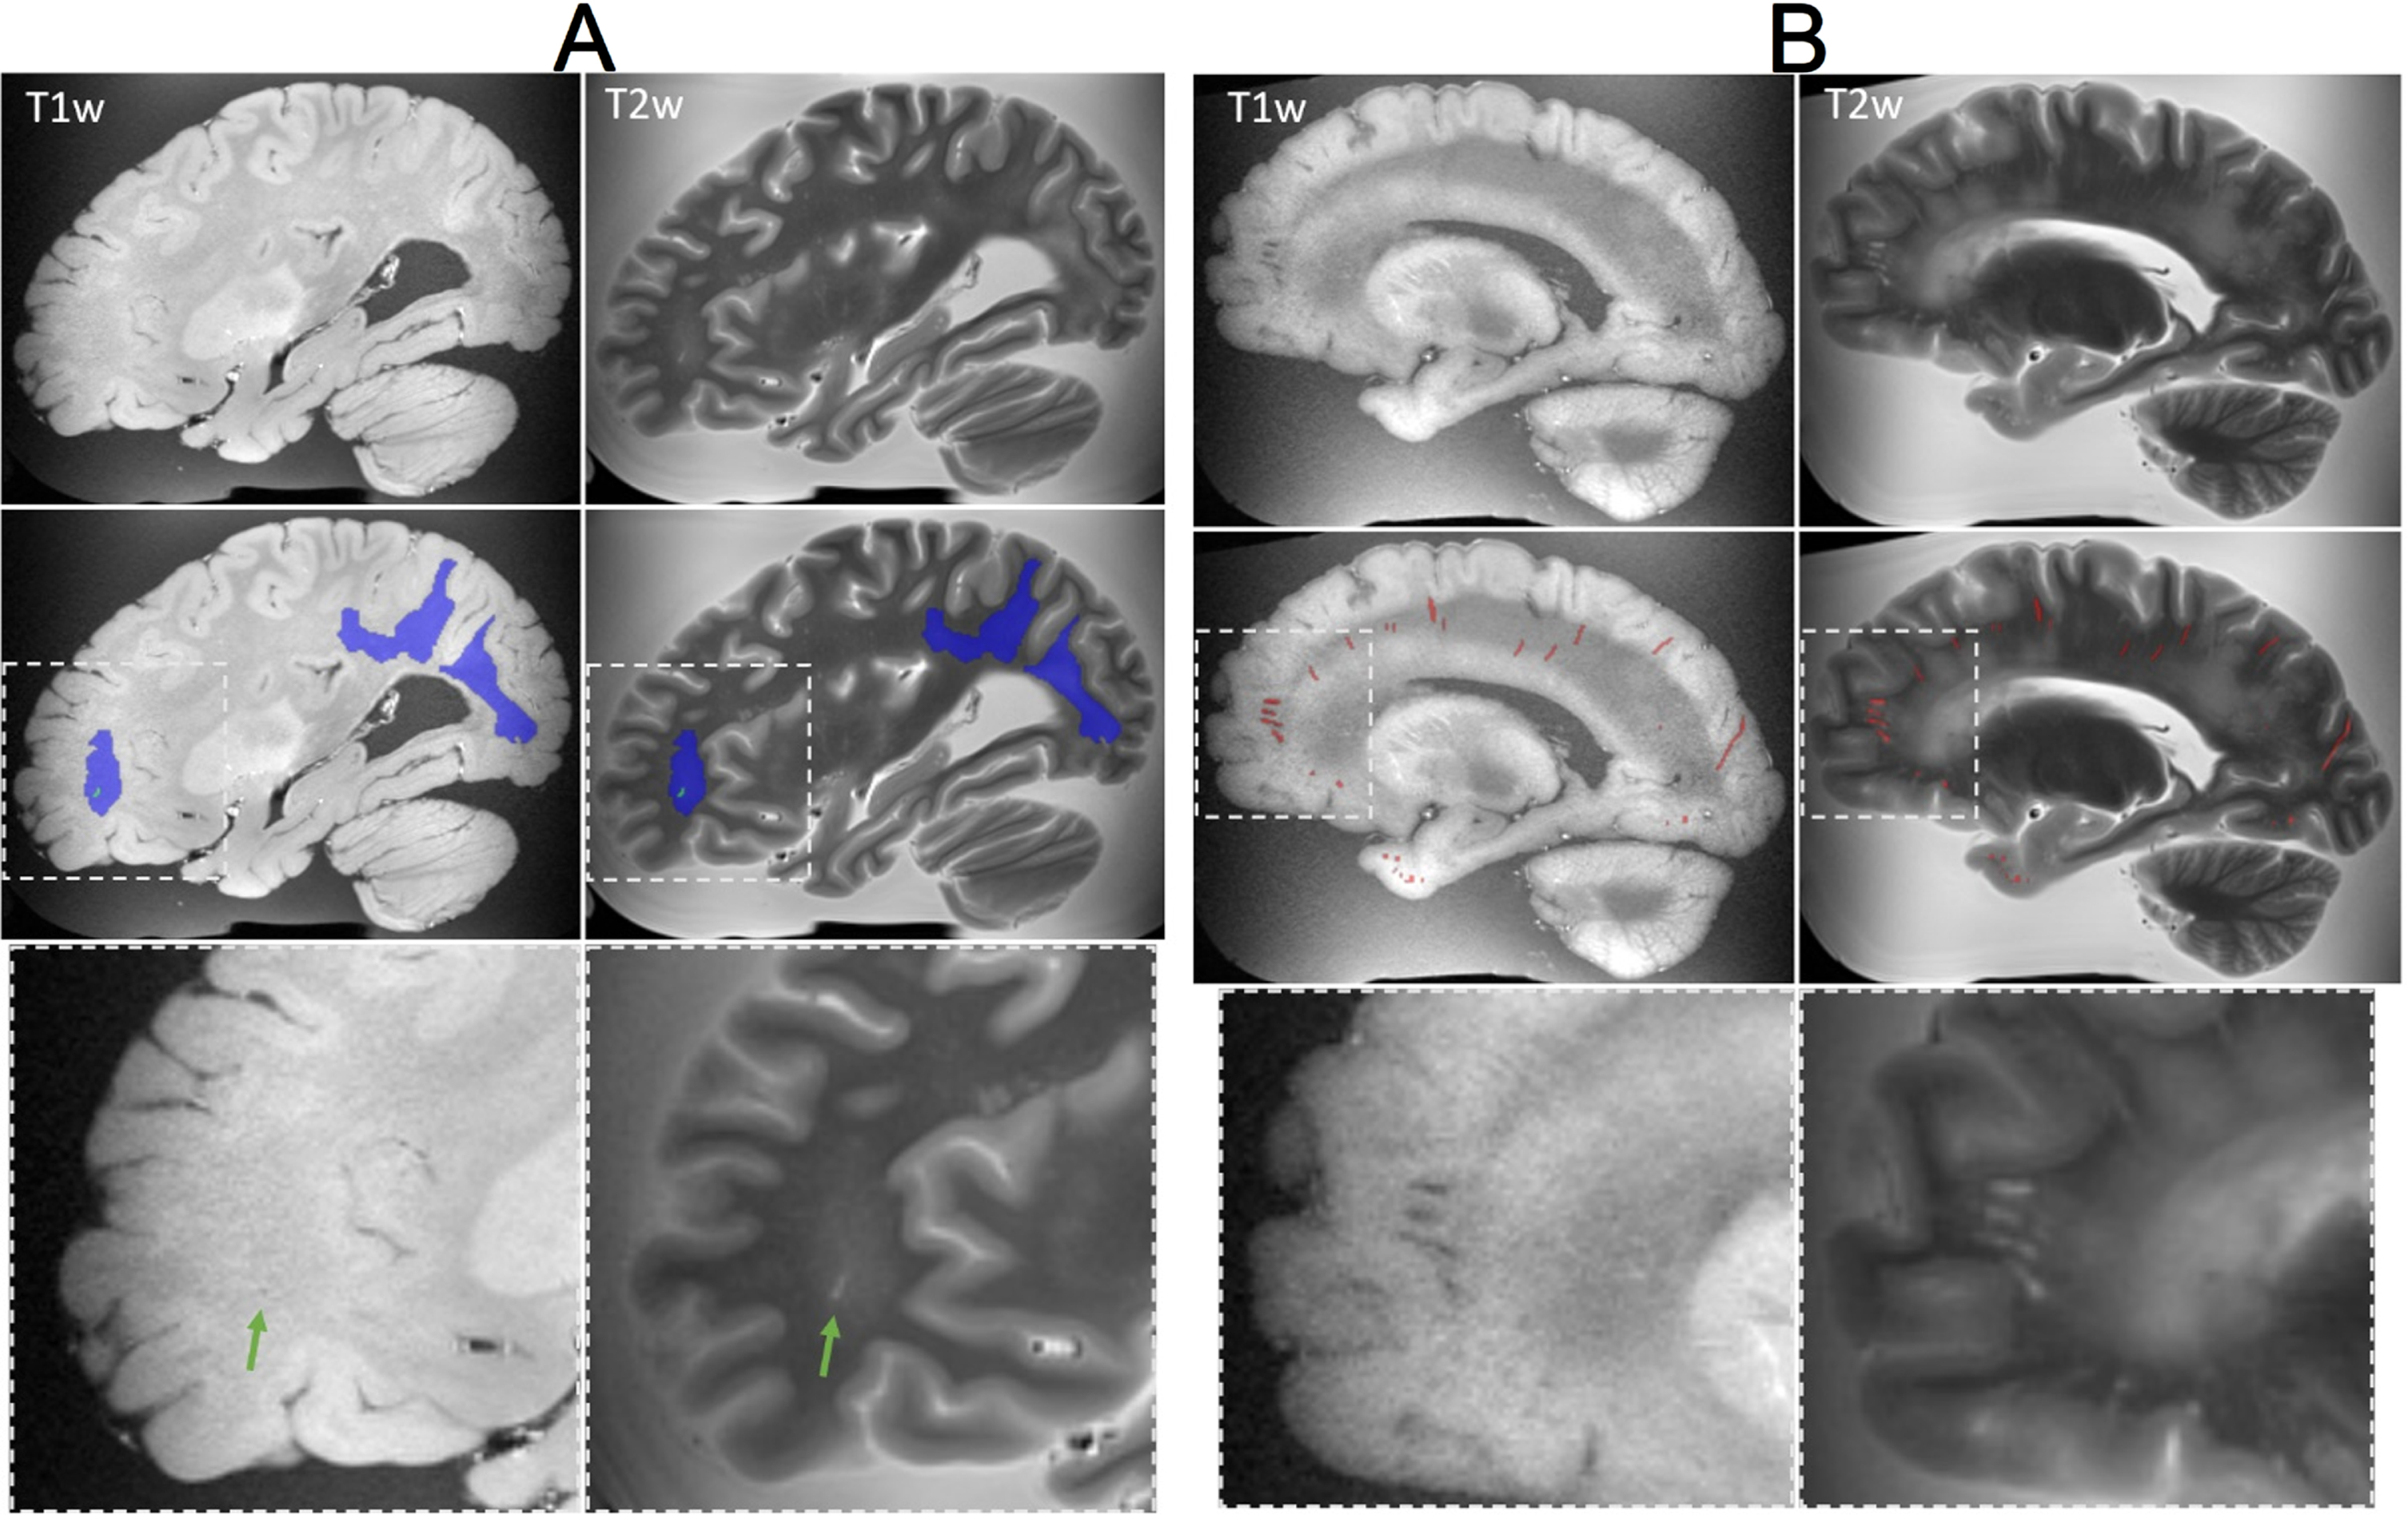 Examples of lesions captured on ex-vivo T1-weighted and T2-TSE MRI. A) (Top row) MRI showing white matter hyperintensities in the occipital and parietal regions, and a small infarction in the frontal lobe. (Middle row) manual segmentation of the white matter hyperintensities (blue) and infarction (green). (Bottom row) Magnified view of the infarction, indicated by the green arrow. B) (Top row) MRI showing enlarged perivascular spaces (EPVS) throughout the brain. (Middle row) manual segmentation of EPVS (red) by an expert. (Bottom row) Magnified view of EPVS in the frontal lobe.